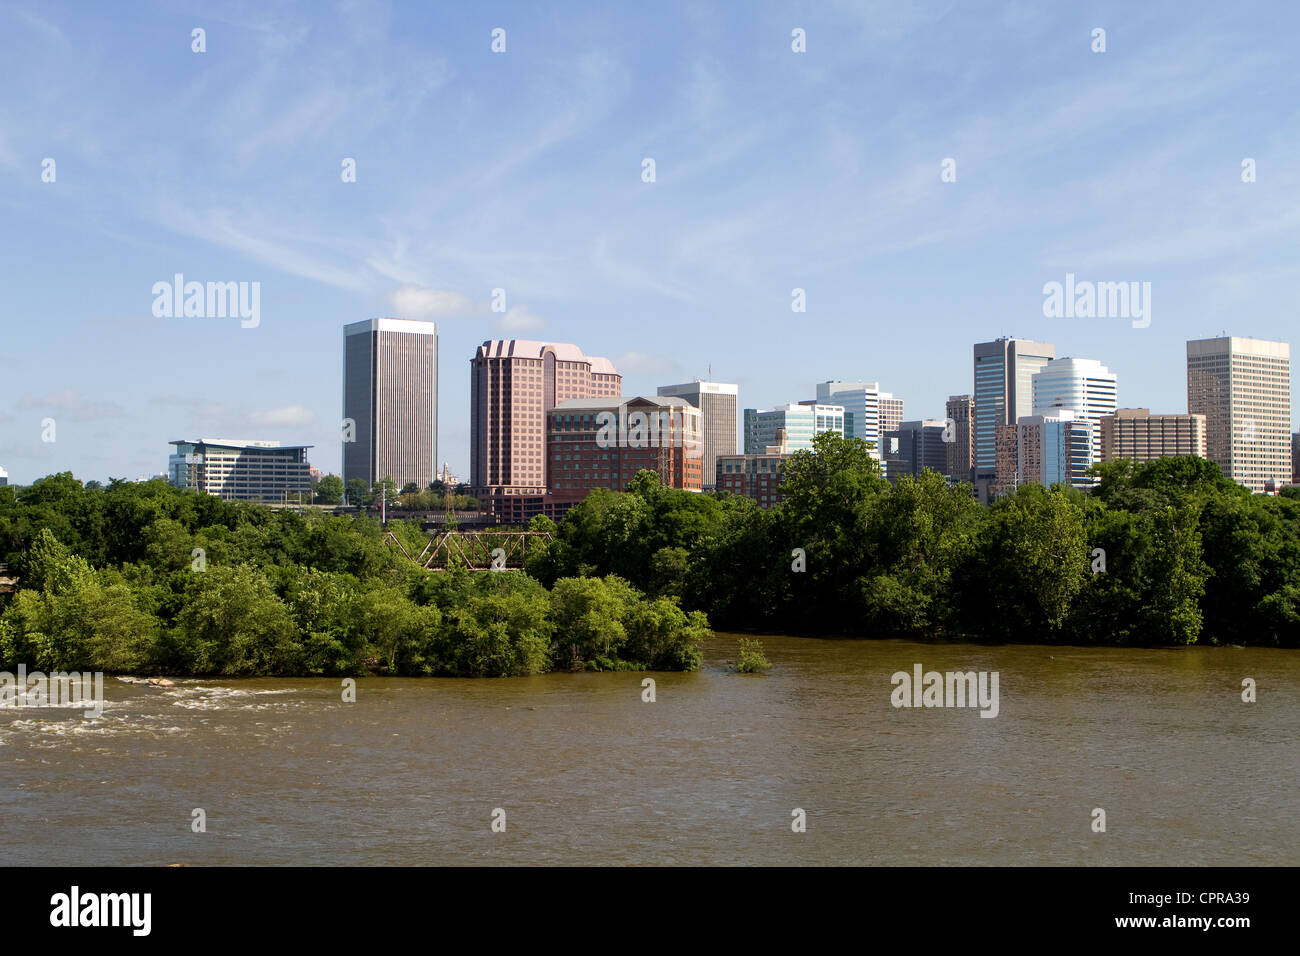 Skyline of Richmond, Virginia viewed from across the James River. Stock Photo